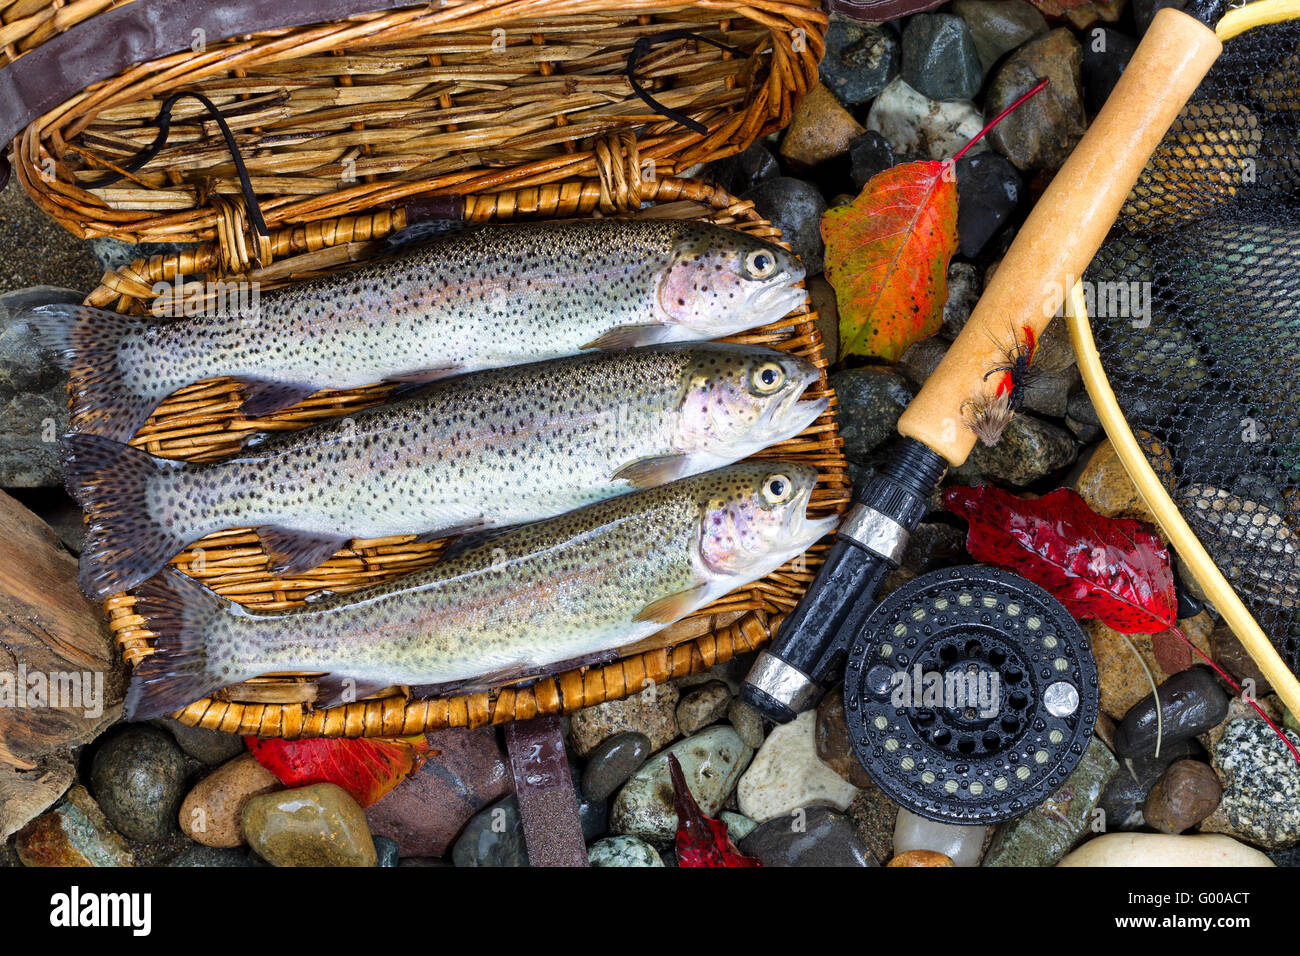 https://c8.alamy.com/comp/G00ACT/creel-with-native-trout-G00ACT.jpg